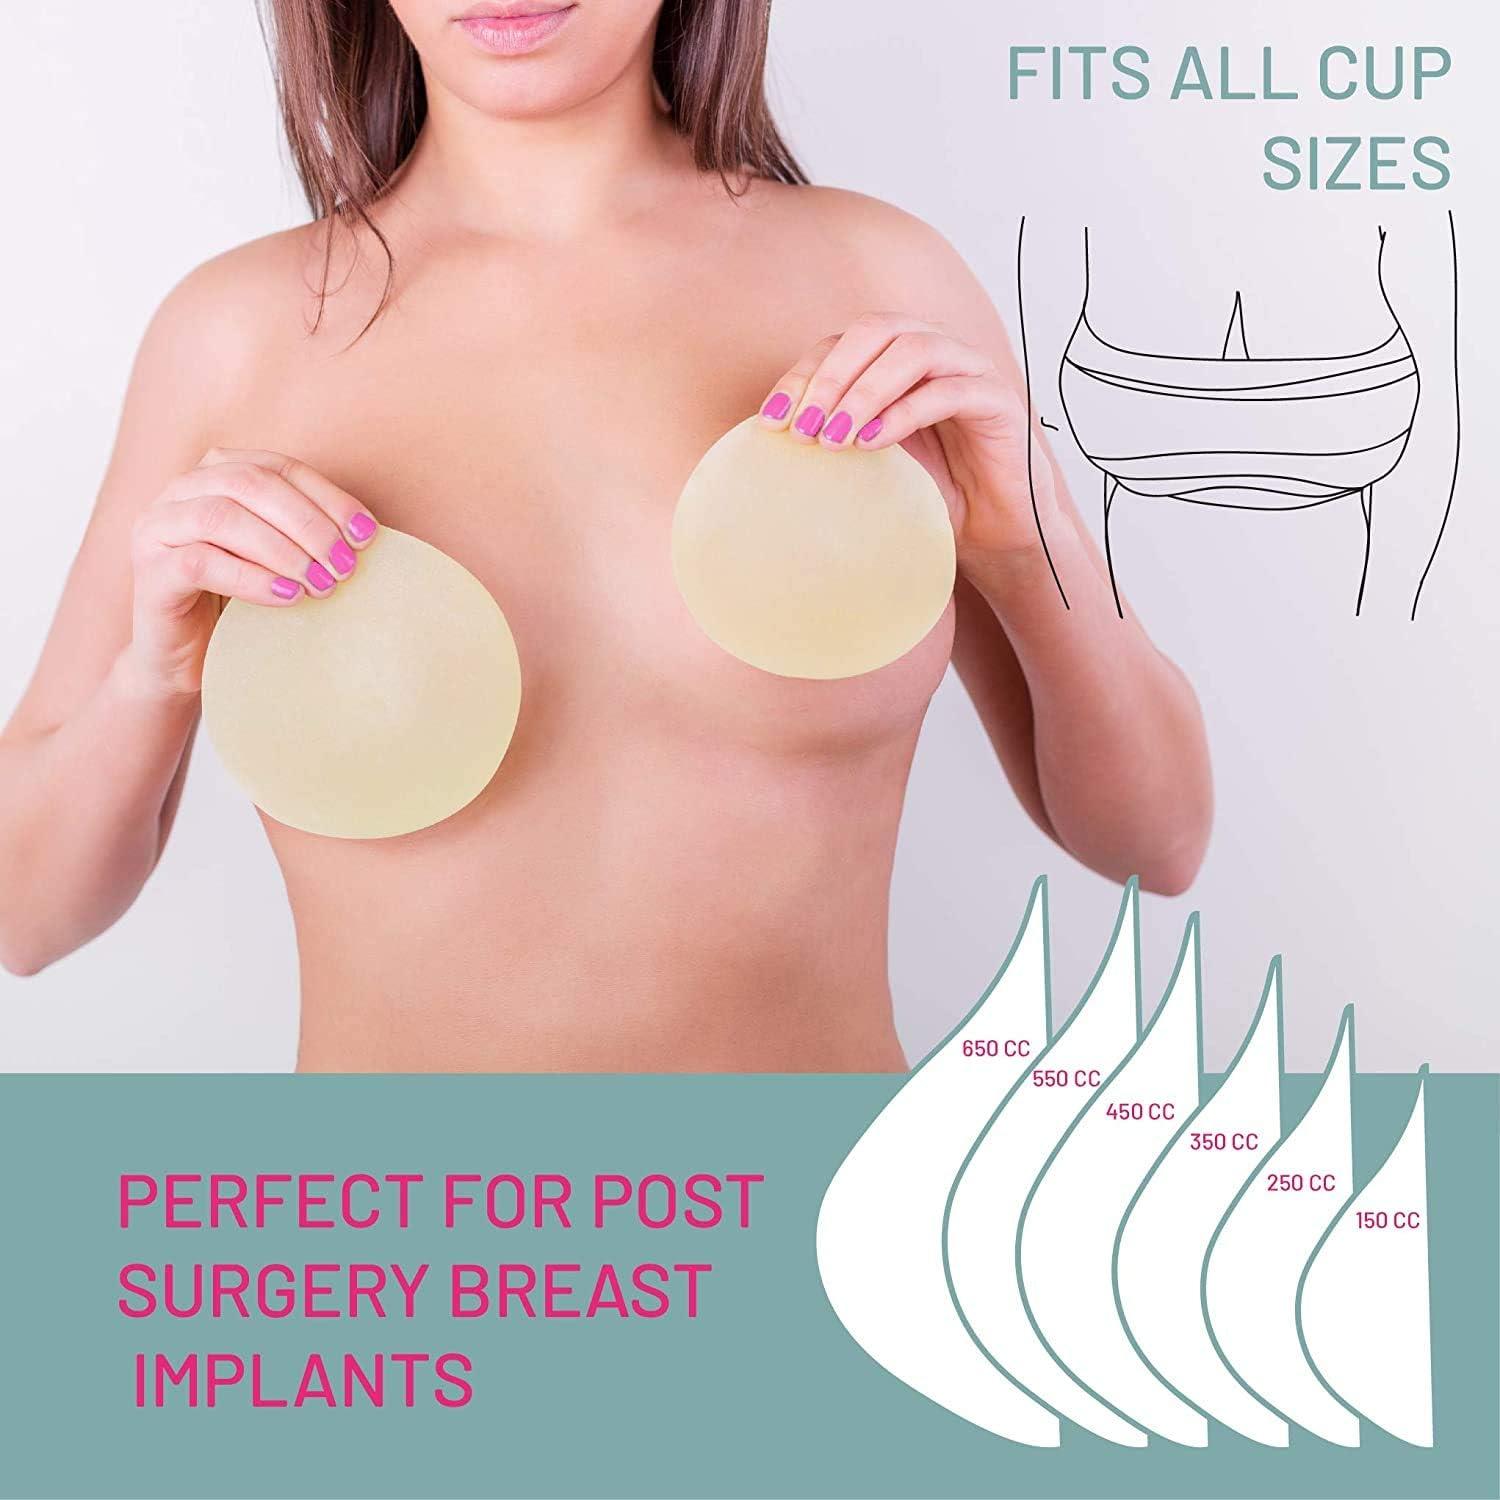 Breast Augmentation Stabilizer Band 6 inches wide –